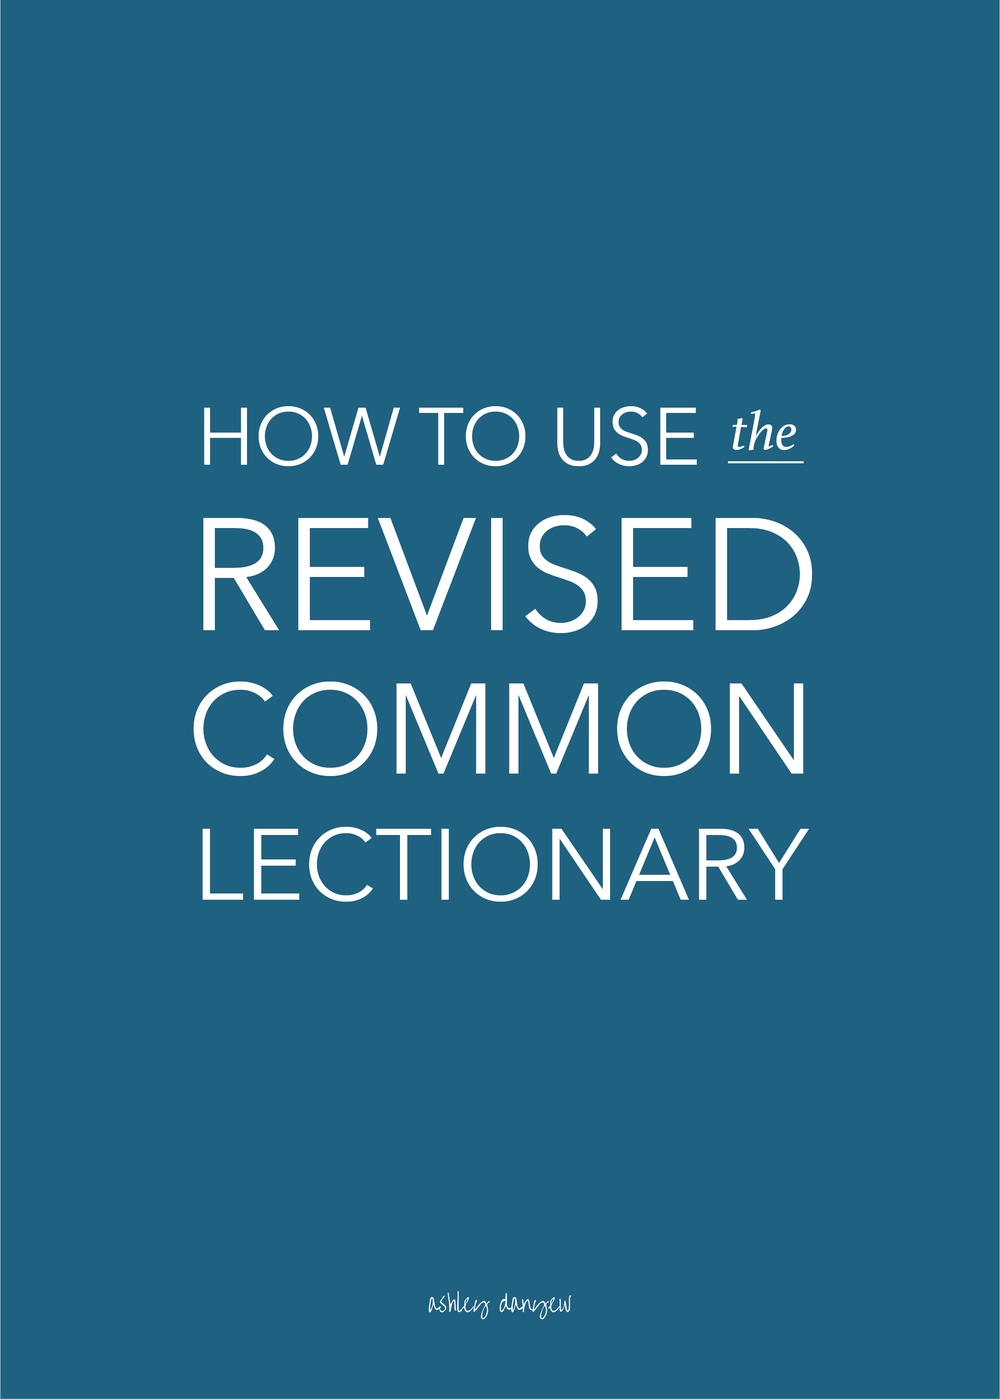 How To Use The Revised Common Lectionary | Ashley Danyew  Show Lectionary For 2020